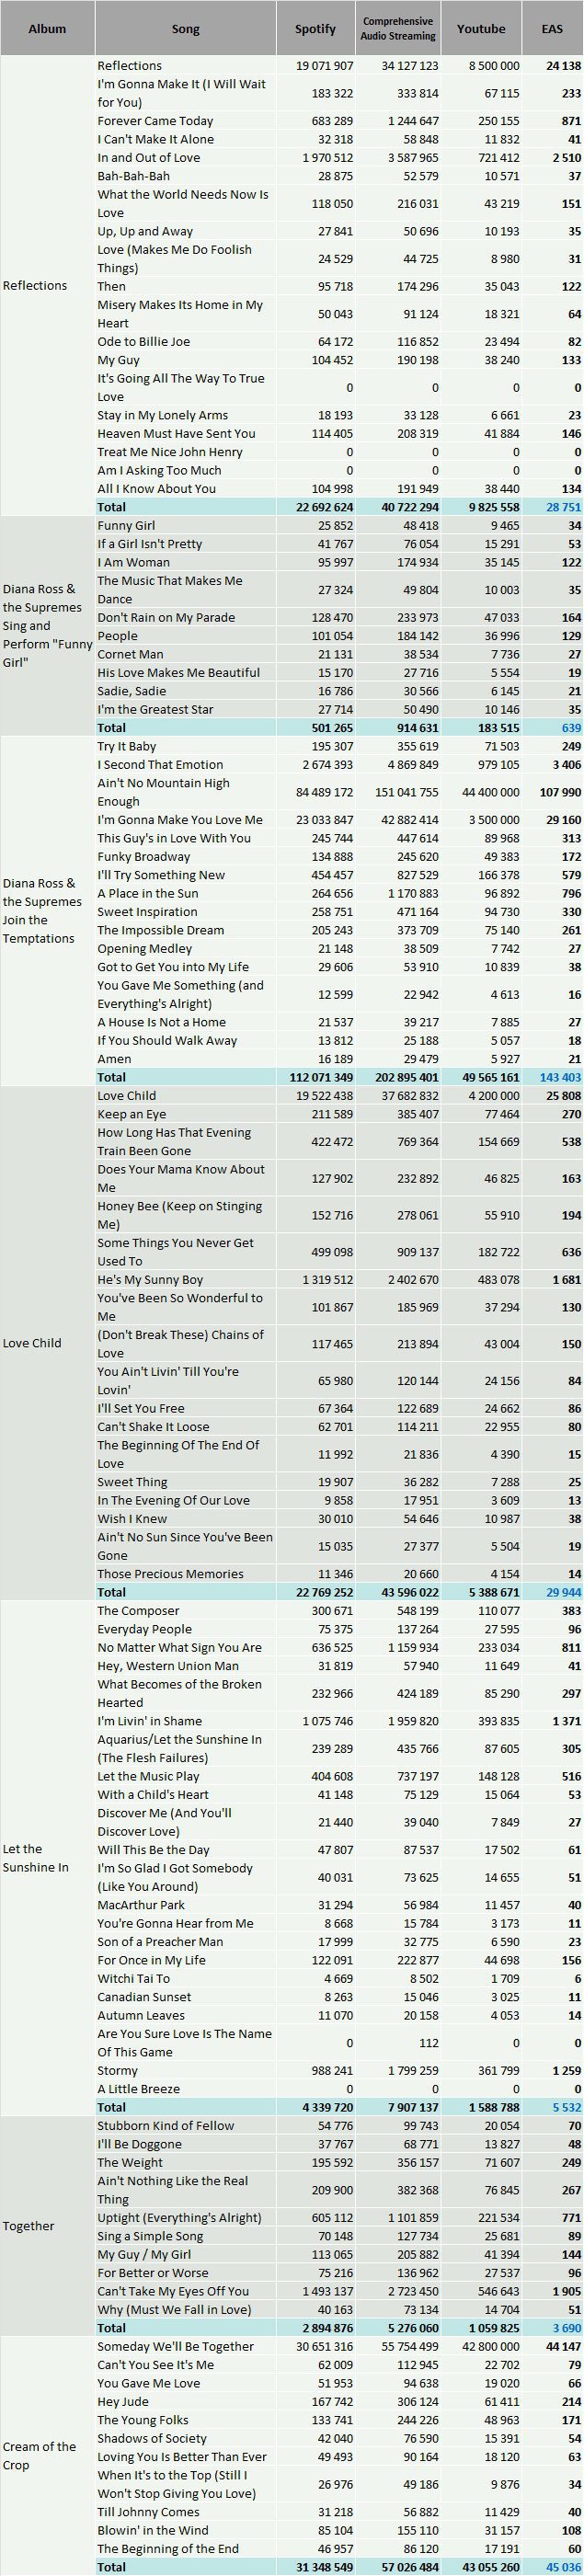 CSPC The Supremes streaming discography statistics 1968-1969